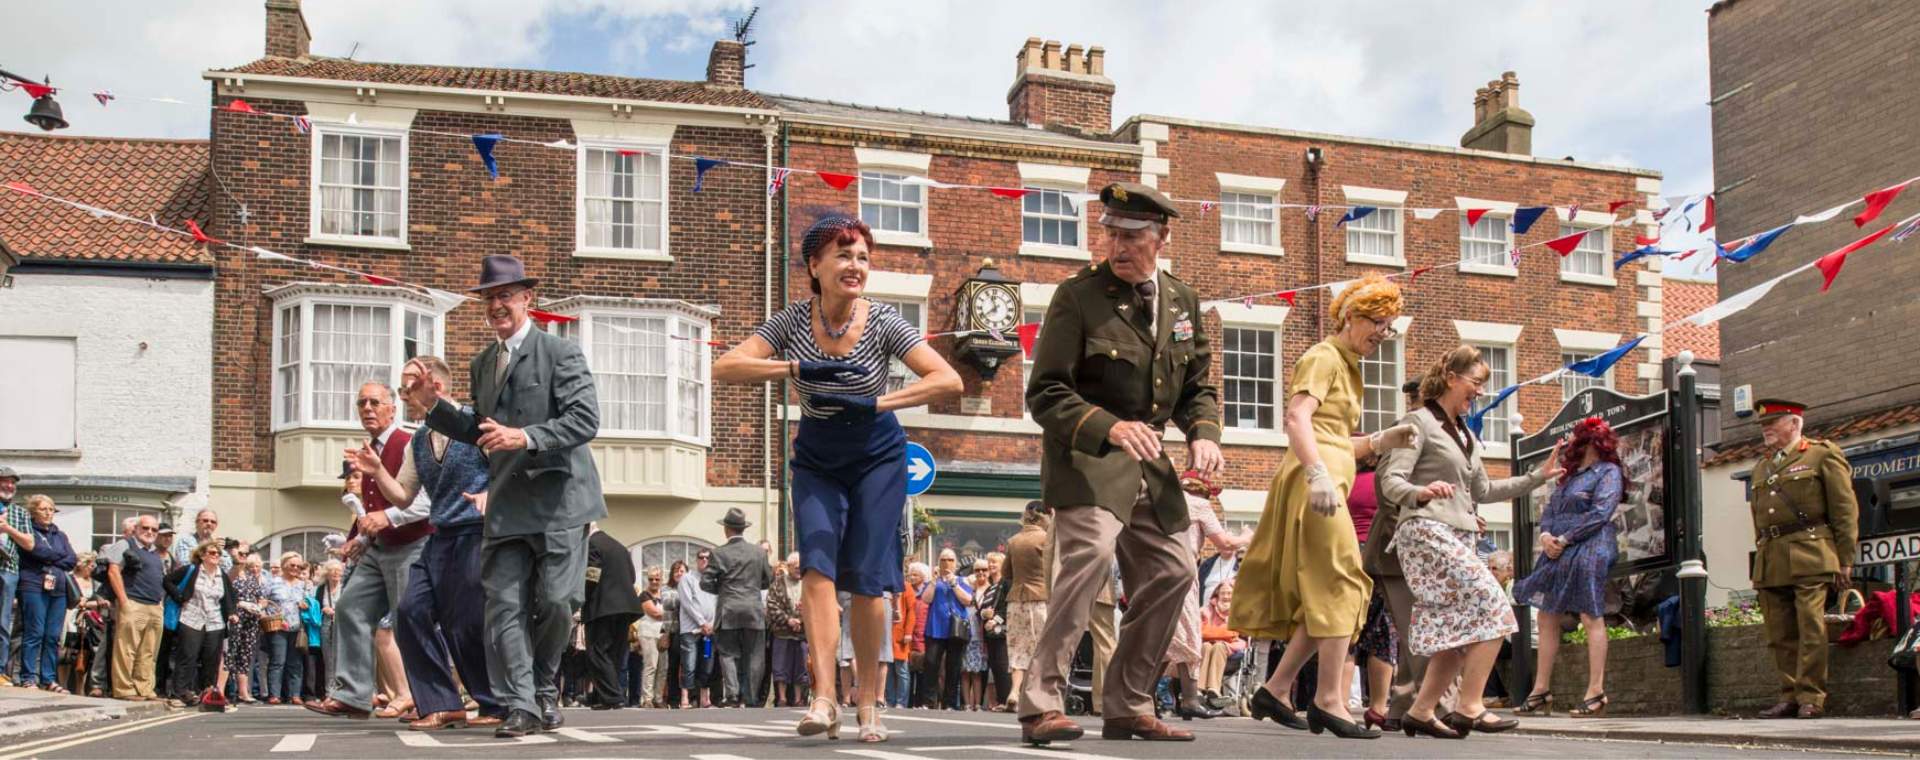 Dancers dressed in vintage clothing performing at the Bridlington 1940s and 50s Festival in East Yorkshire